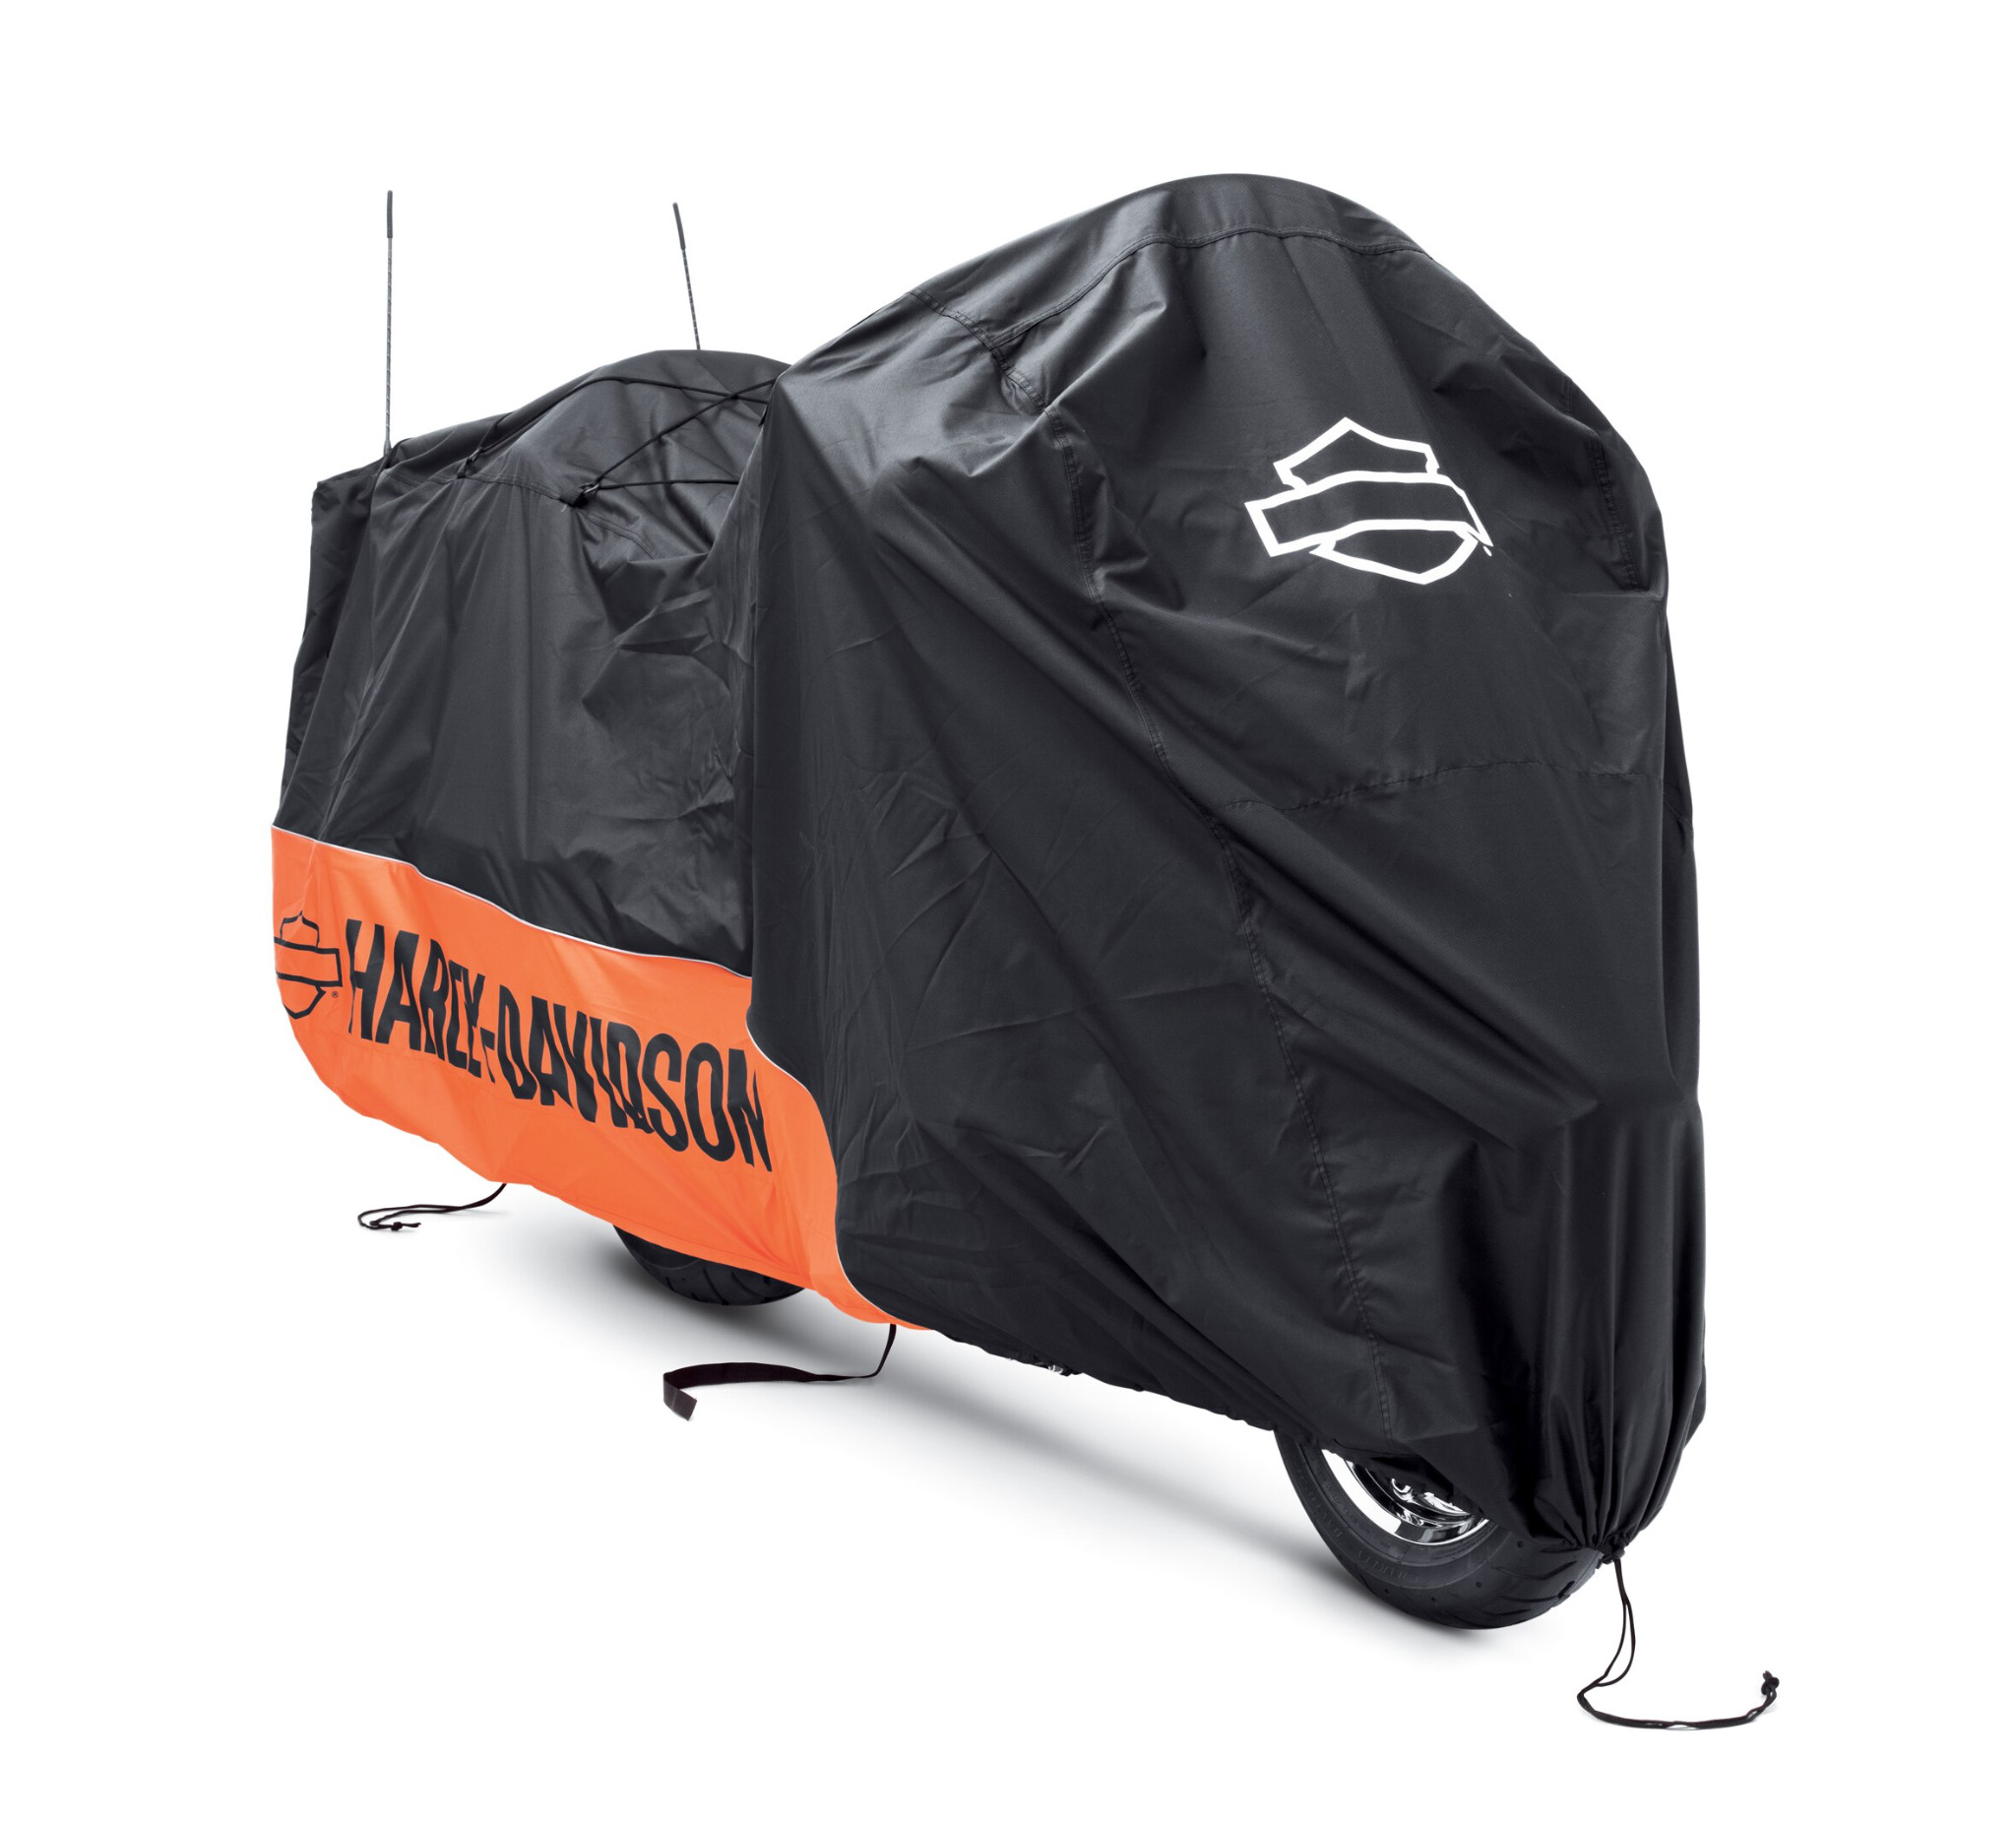 XXXL Waterproof Motorcycle Cover For Harley Davidson Road Street Glide Touring